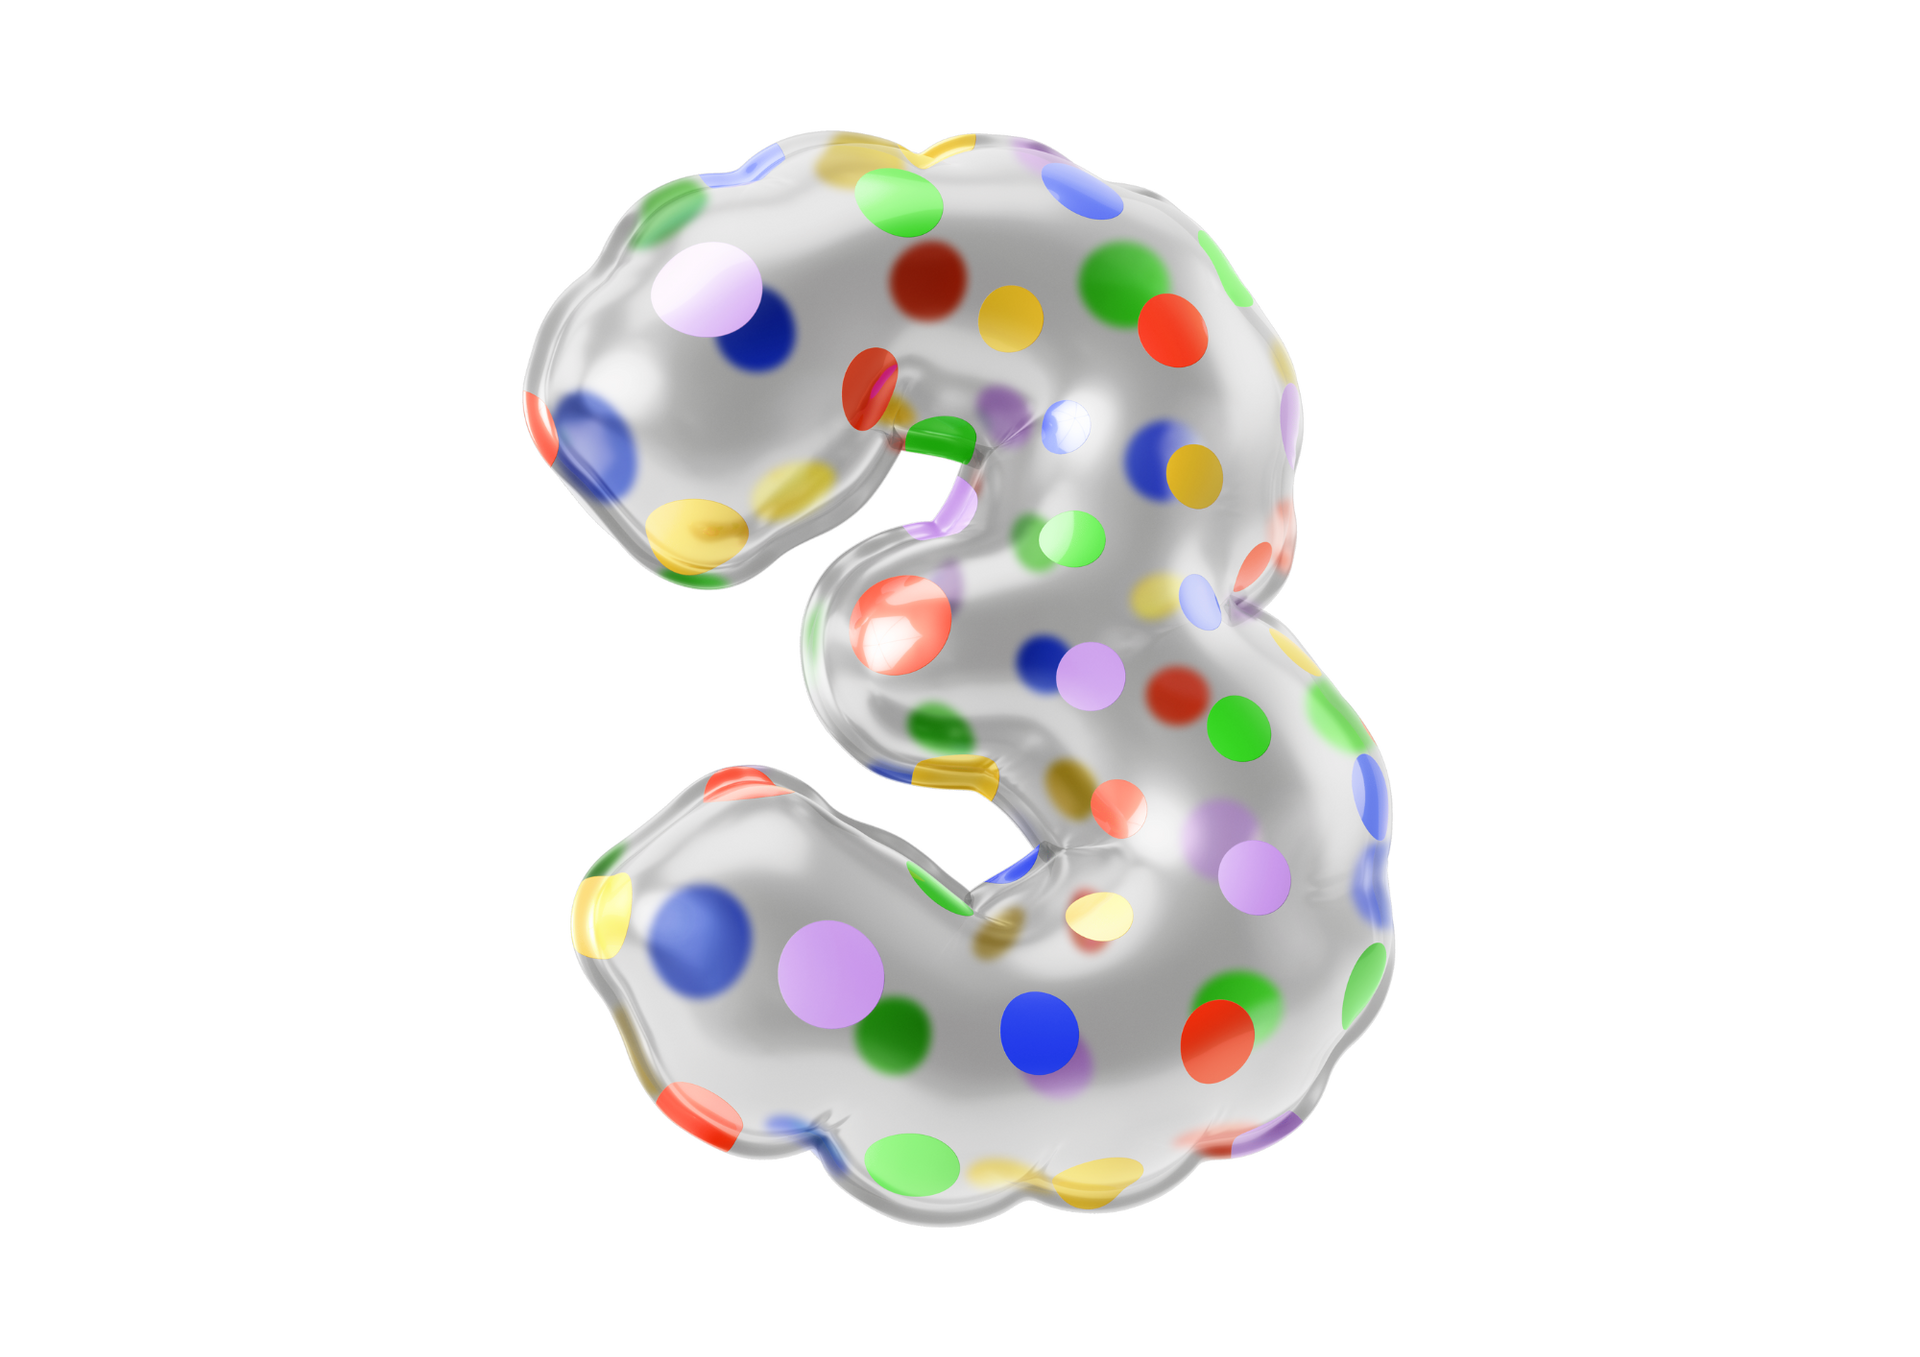 A balloon in the shape of the number three with colorful polka dots on it.